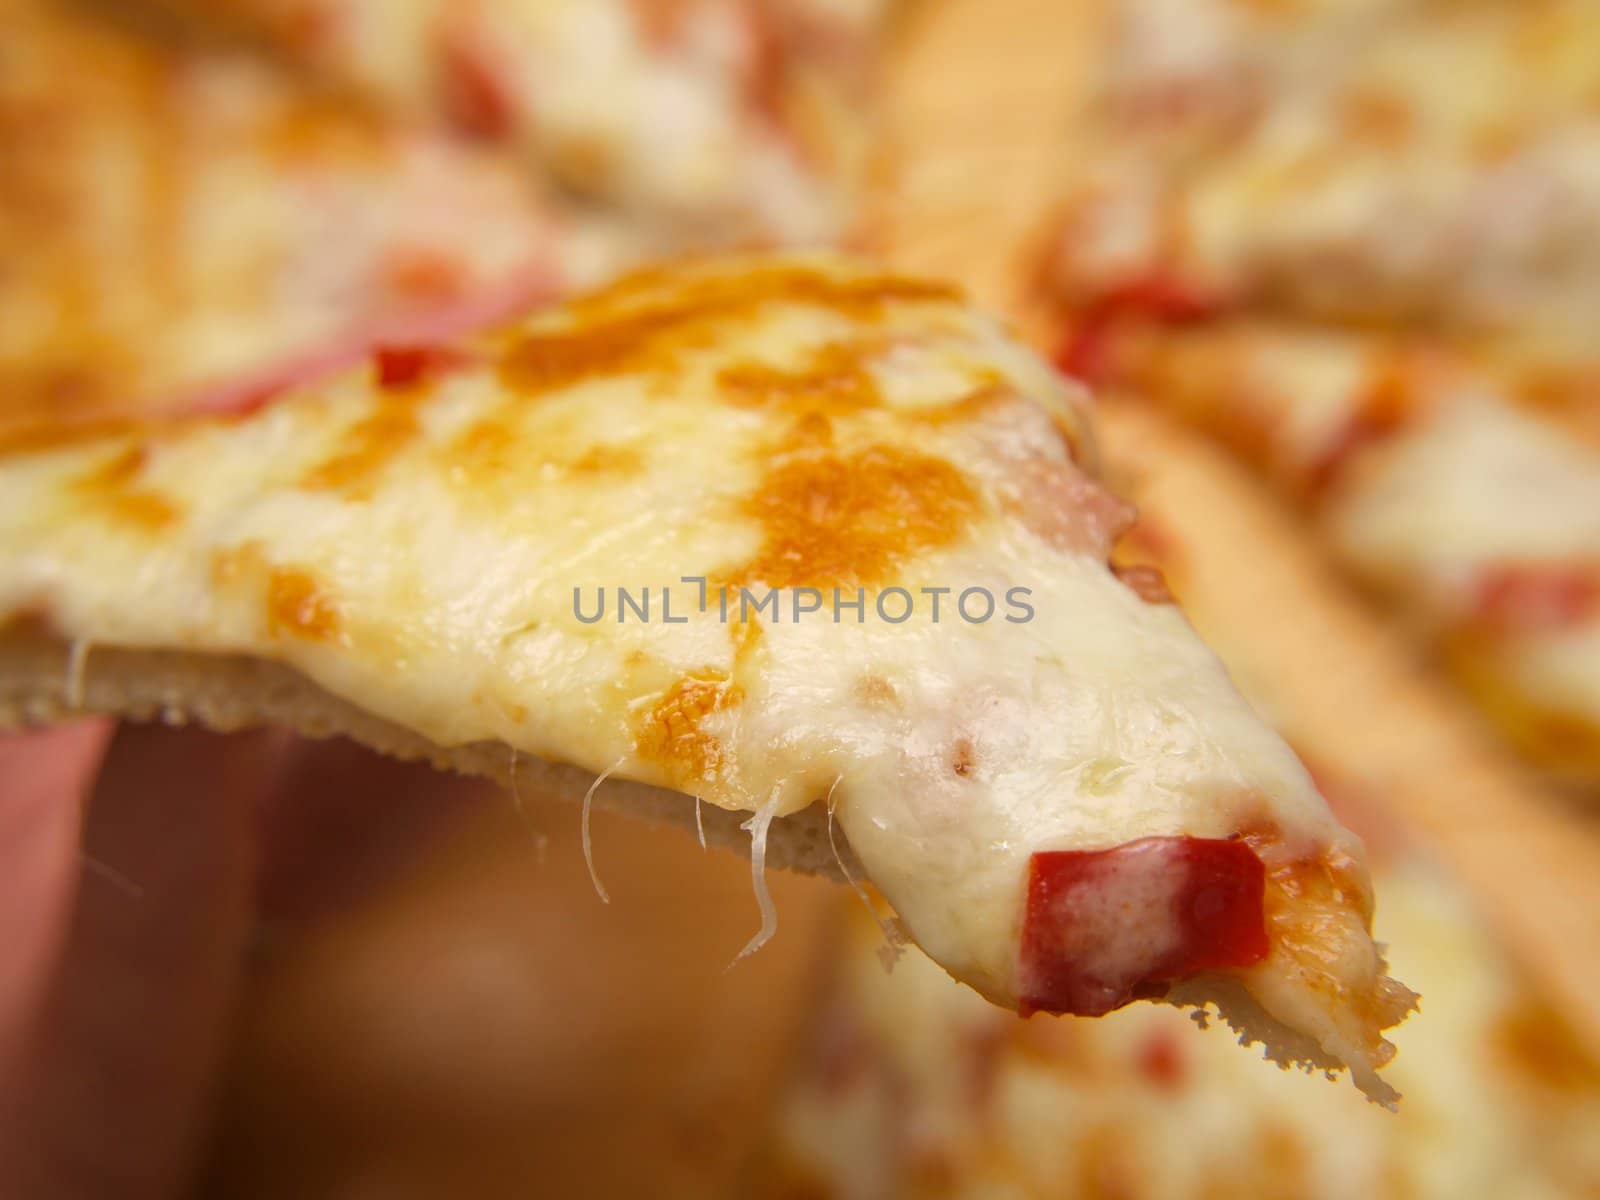 Slice of pizza, held up by a person by Arvebettum